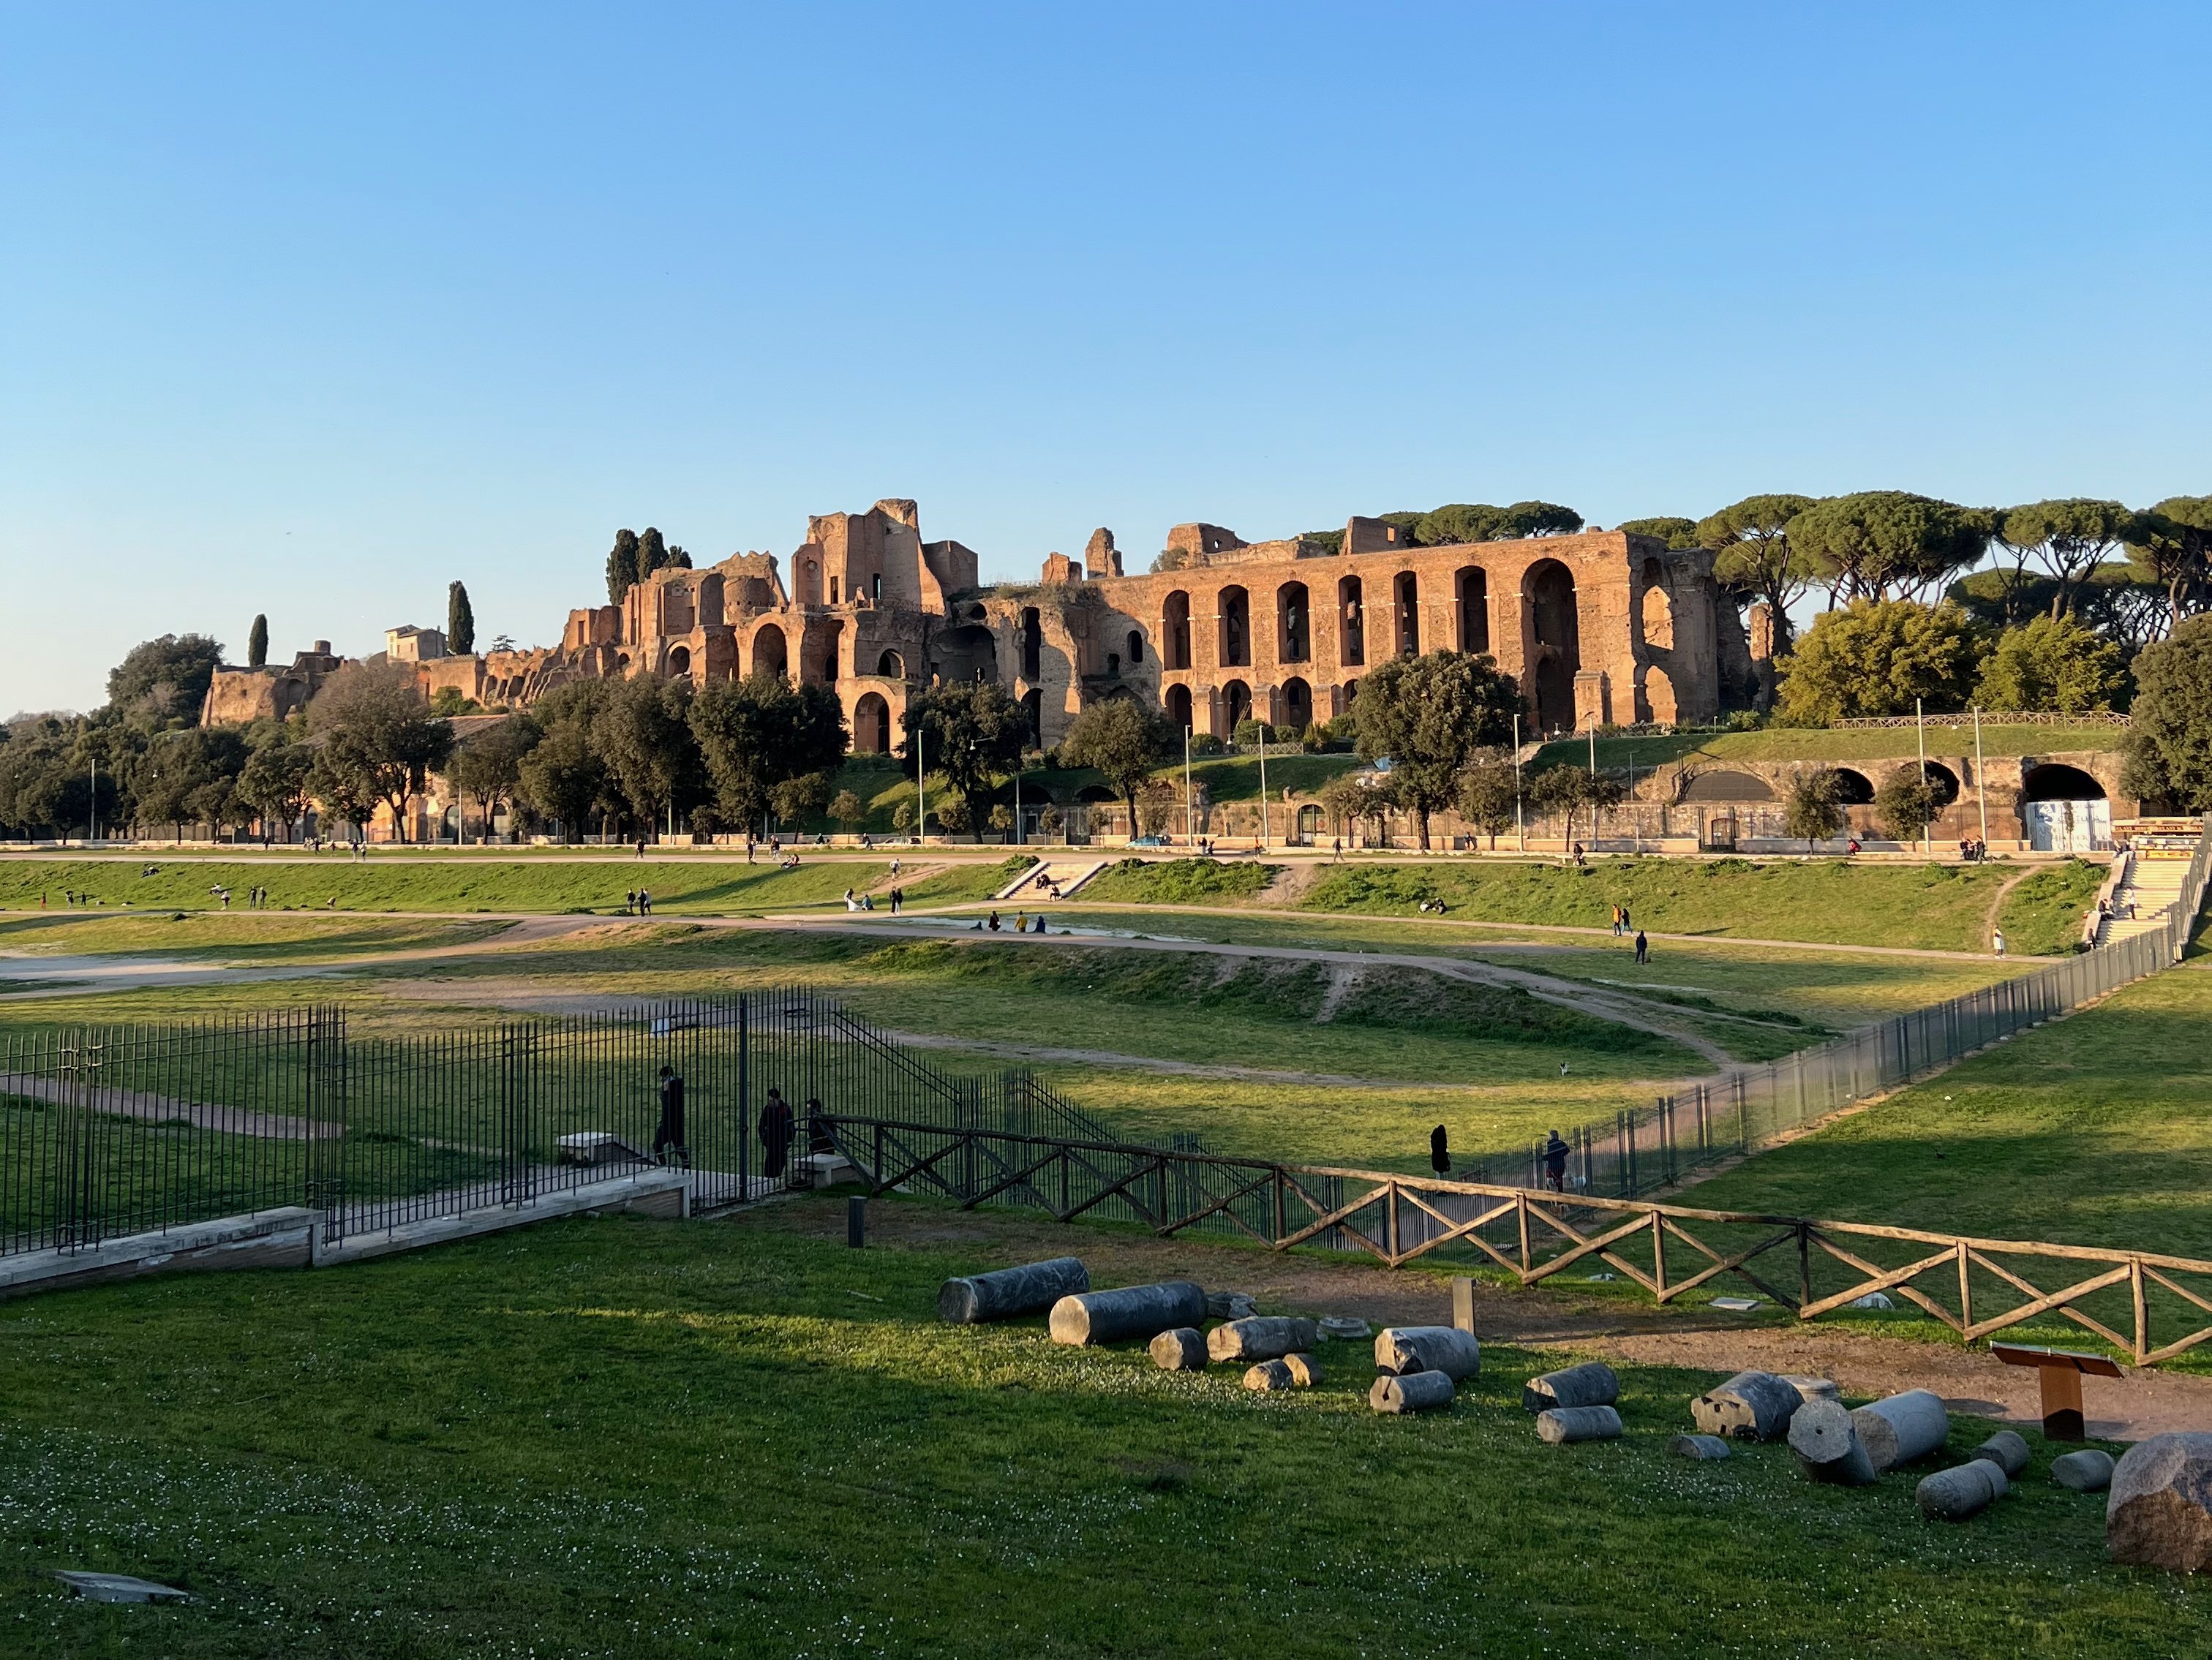 View over the Circus Maximus